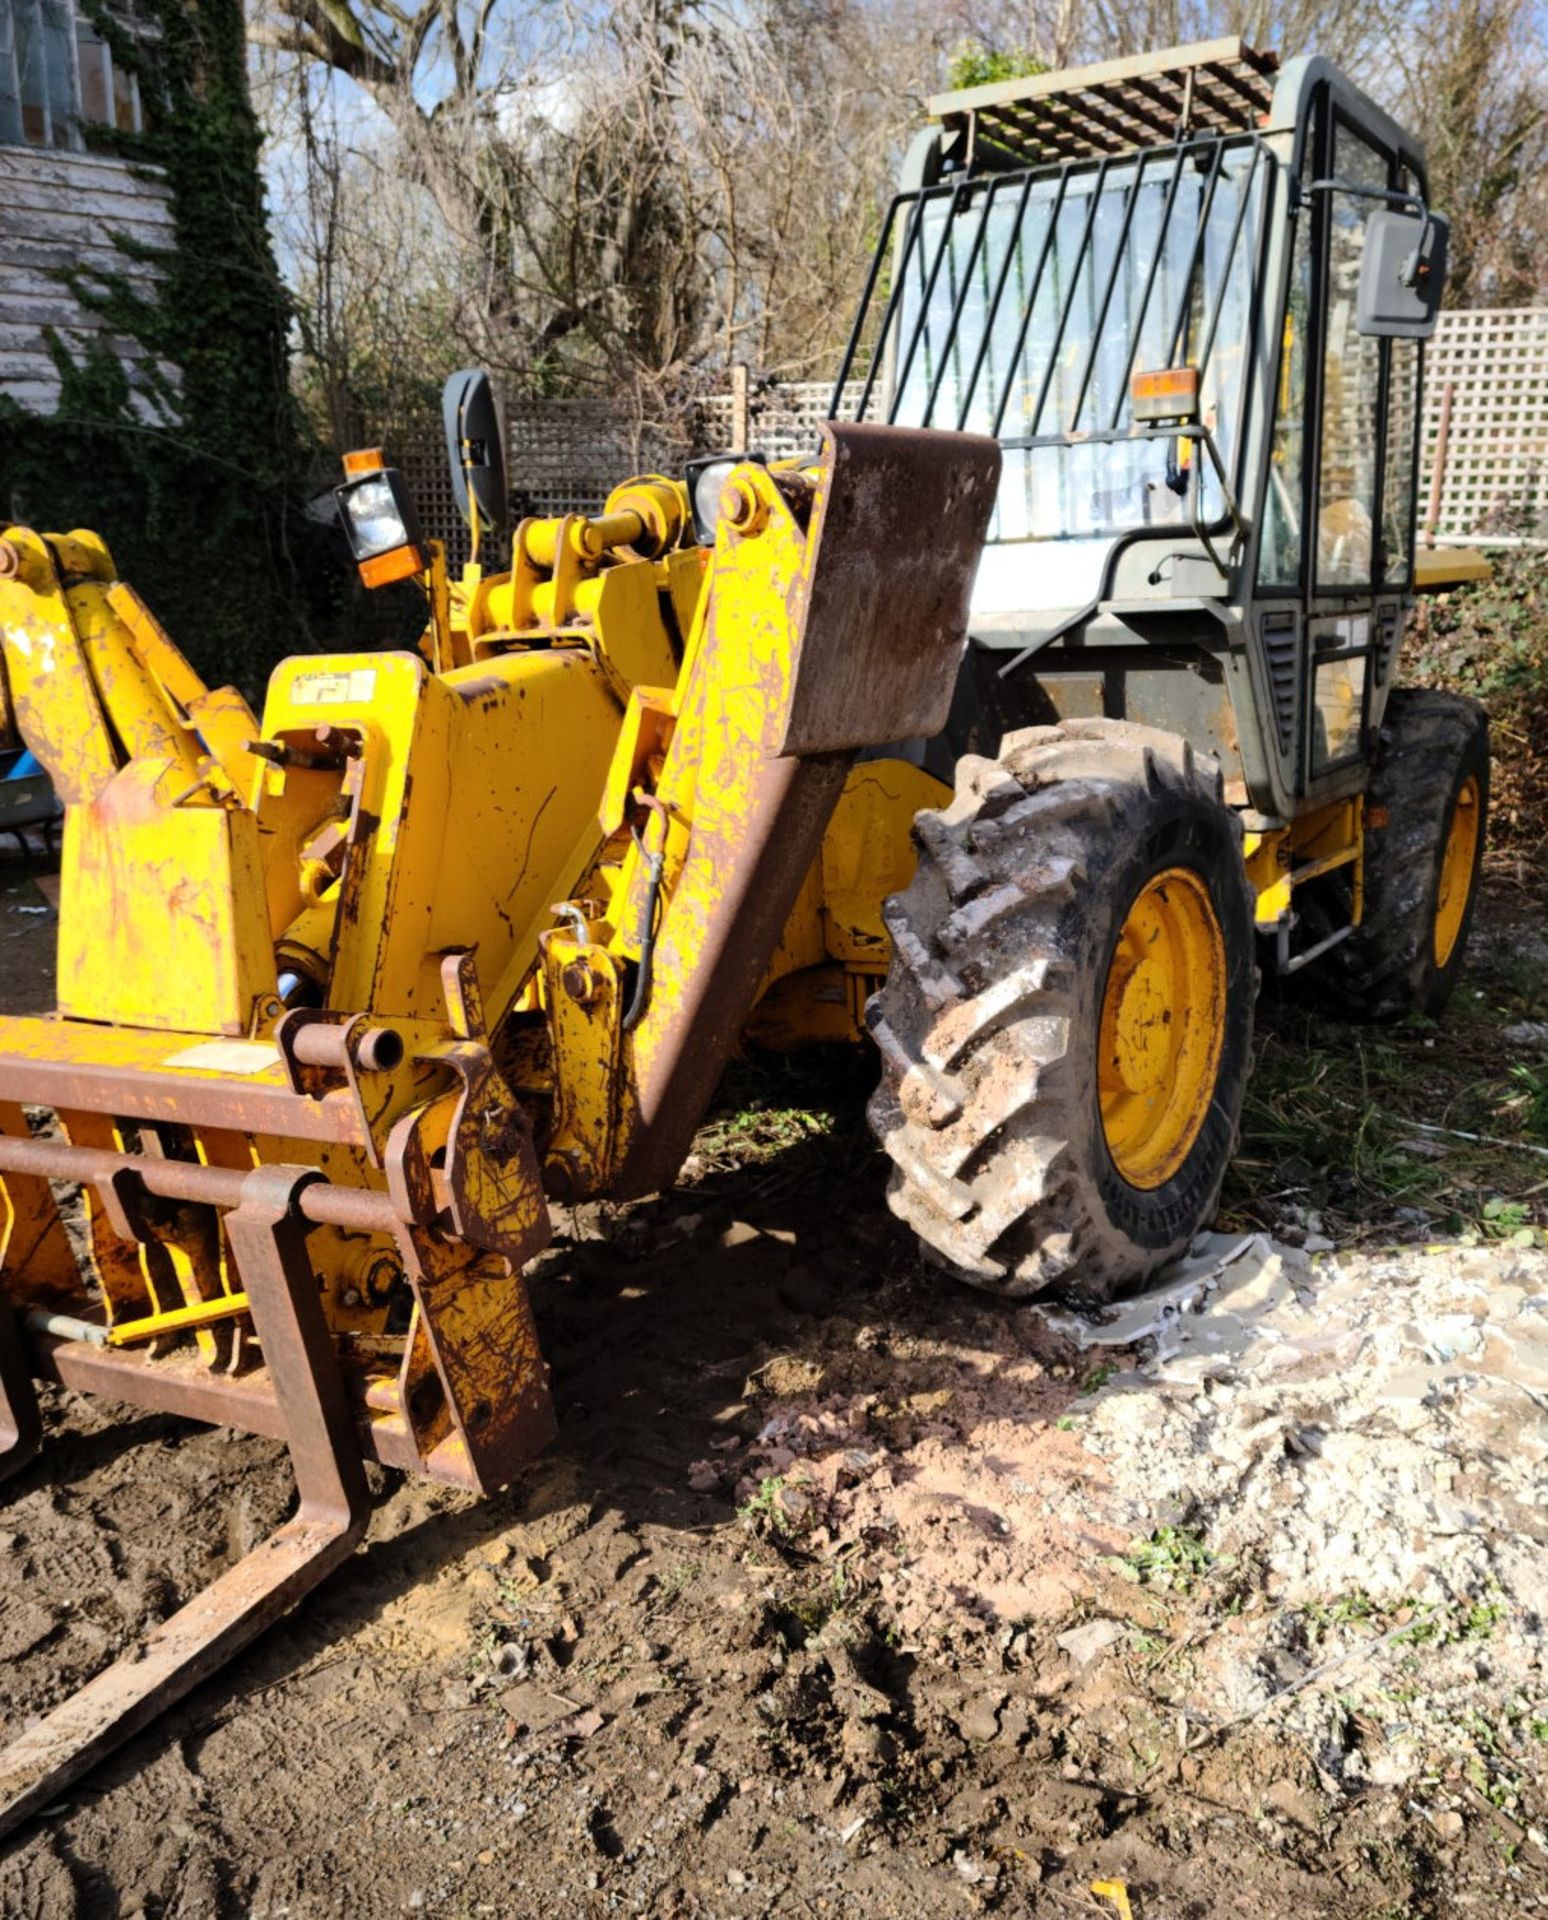 1 x JCB Loadall Telehandler 530-120 - 7540 Hours - CL846 - Location: Oxford OX2 - Image 3 of 49